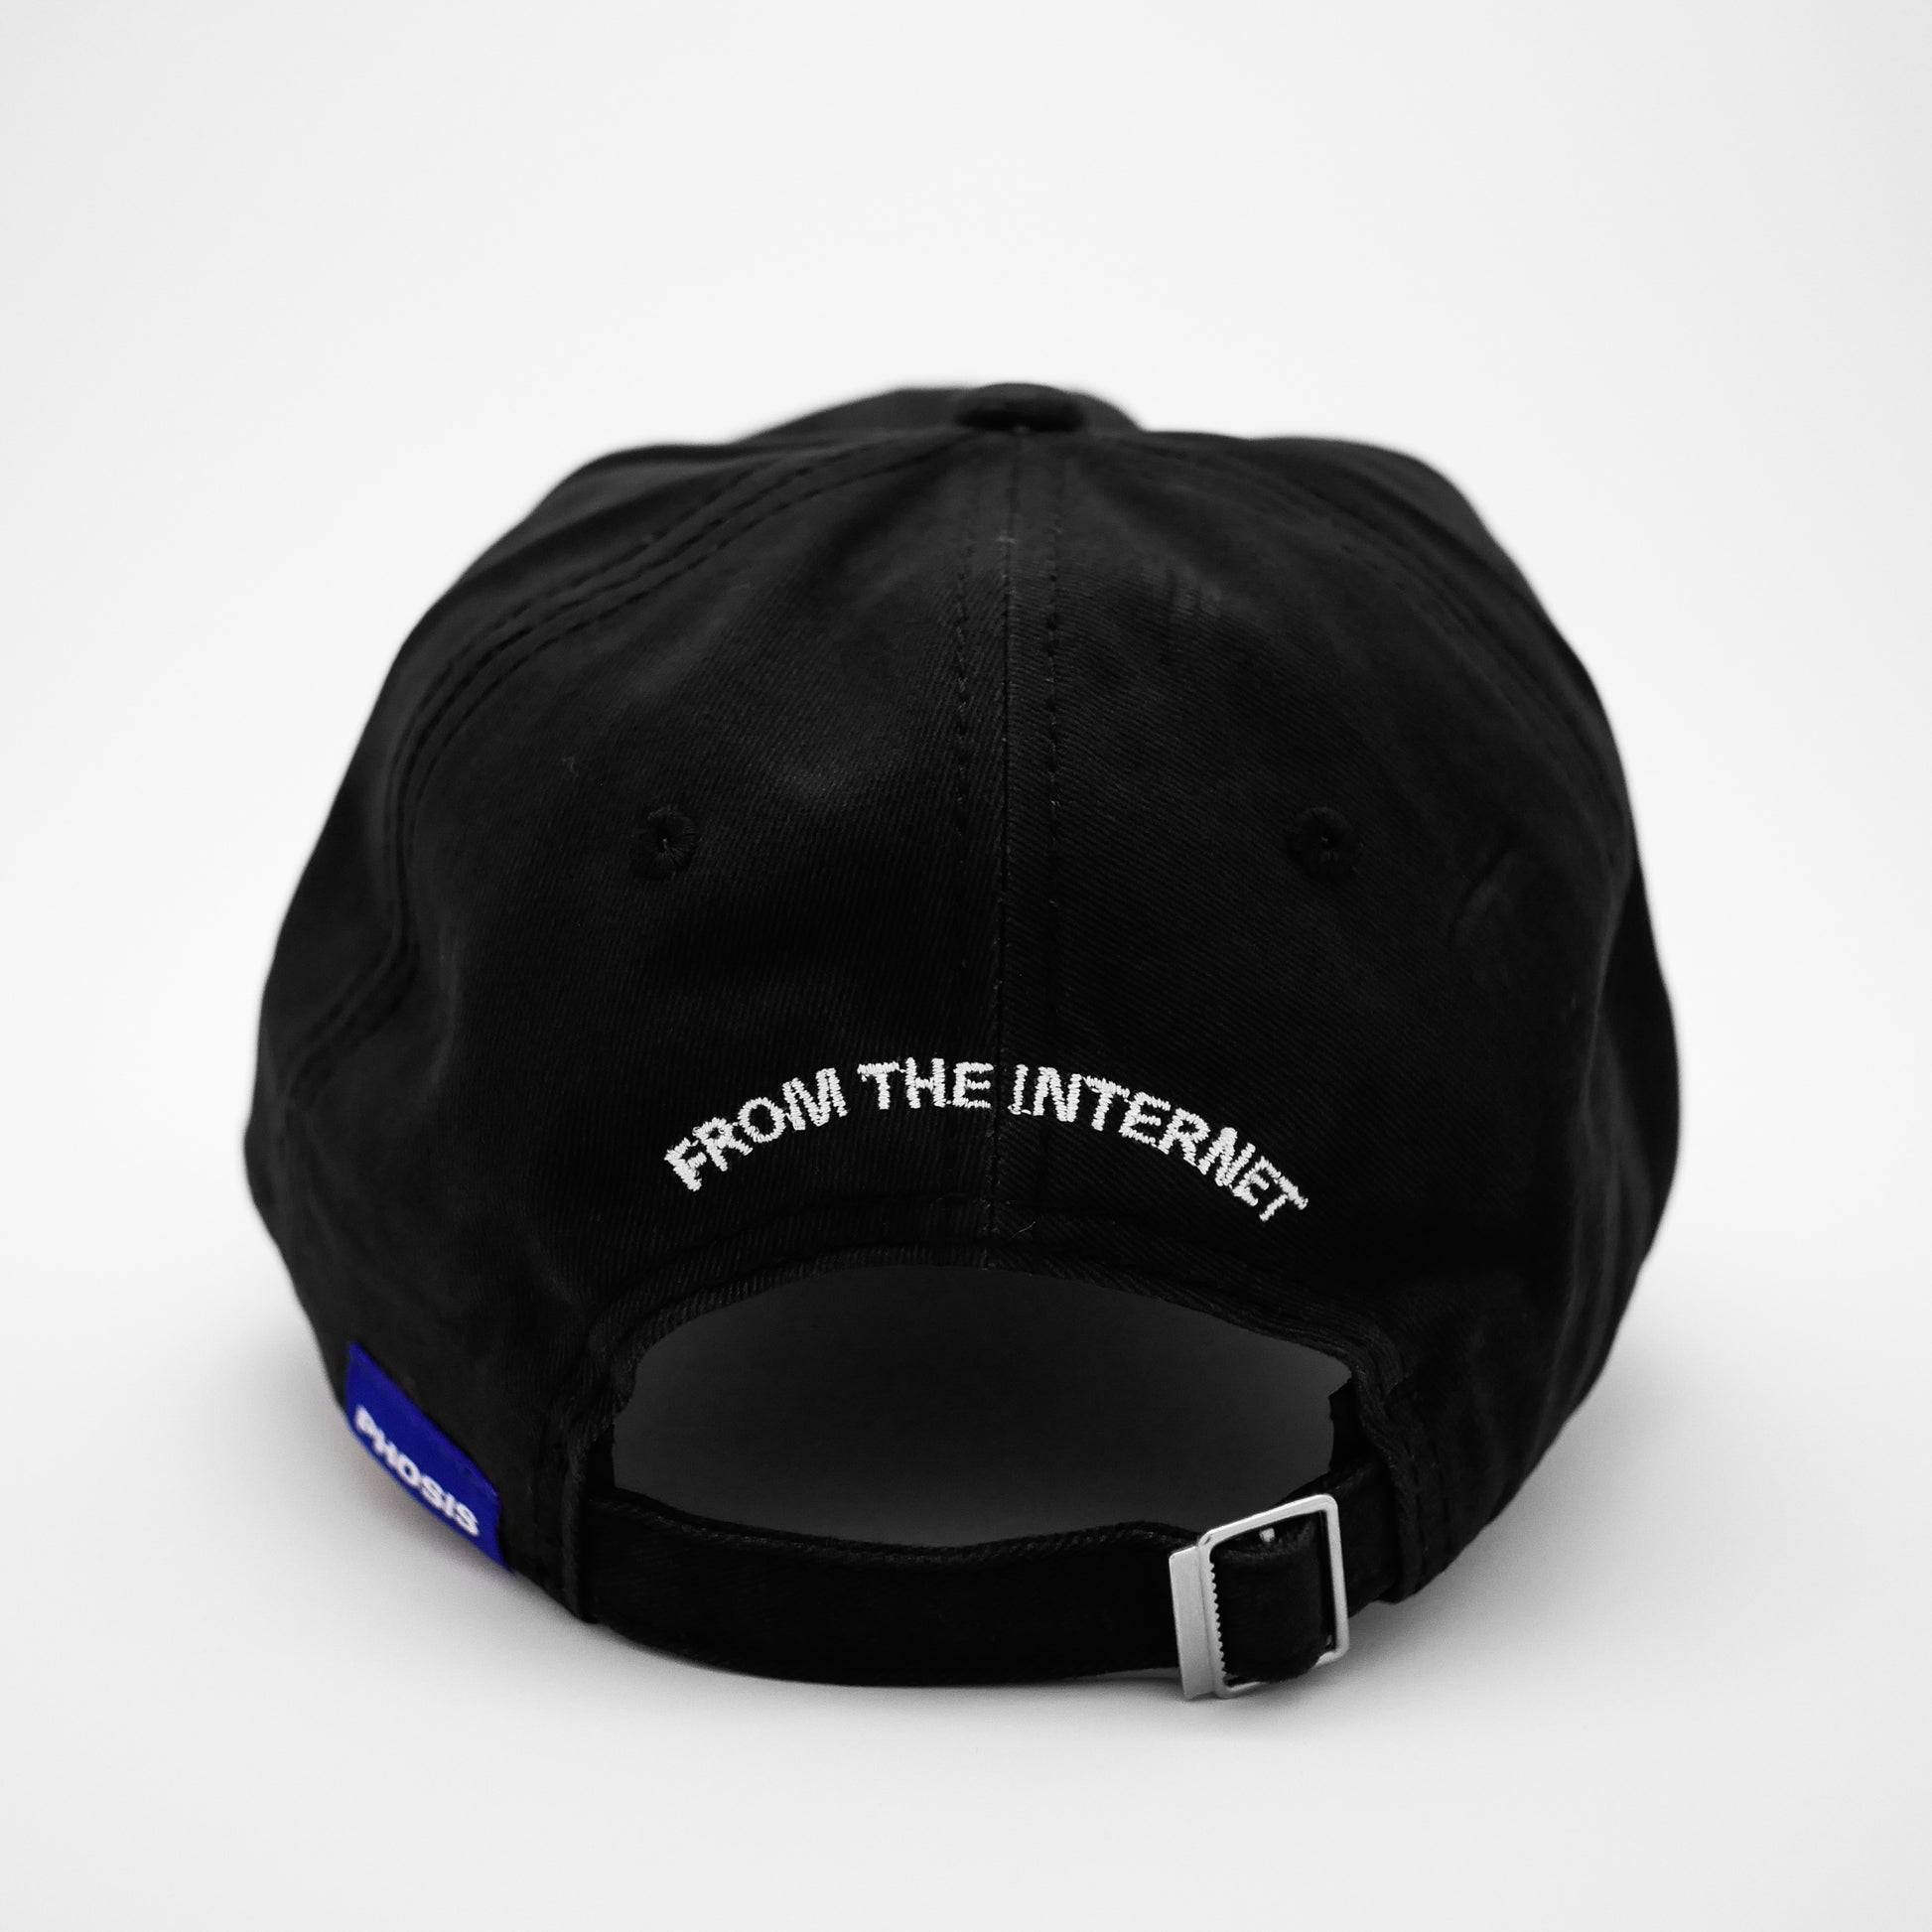 Back view of the embroidered OLD ENGLISH "PHOSIS" black dad hat from PHOSIS® Clothing